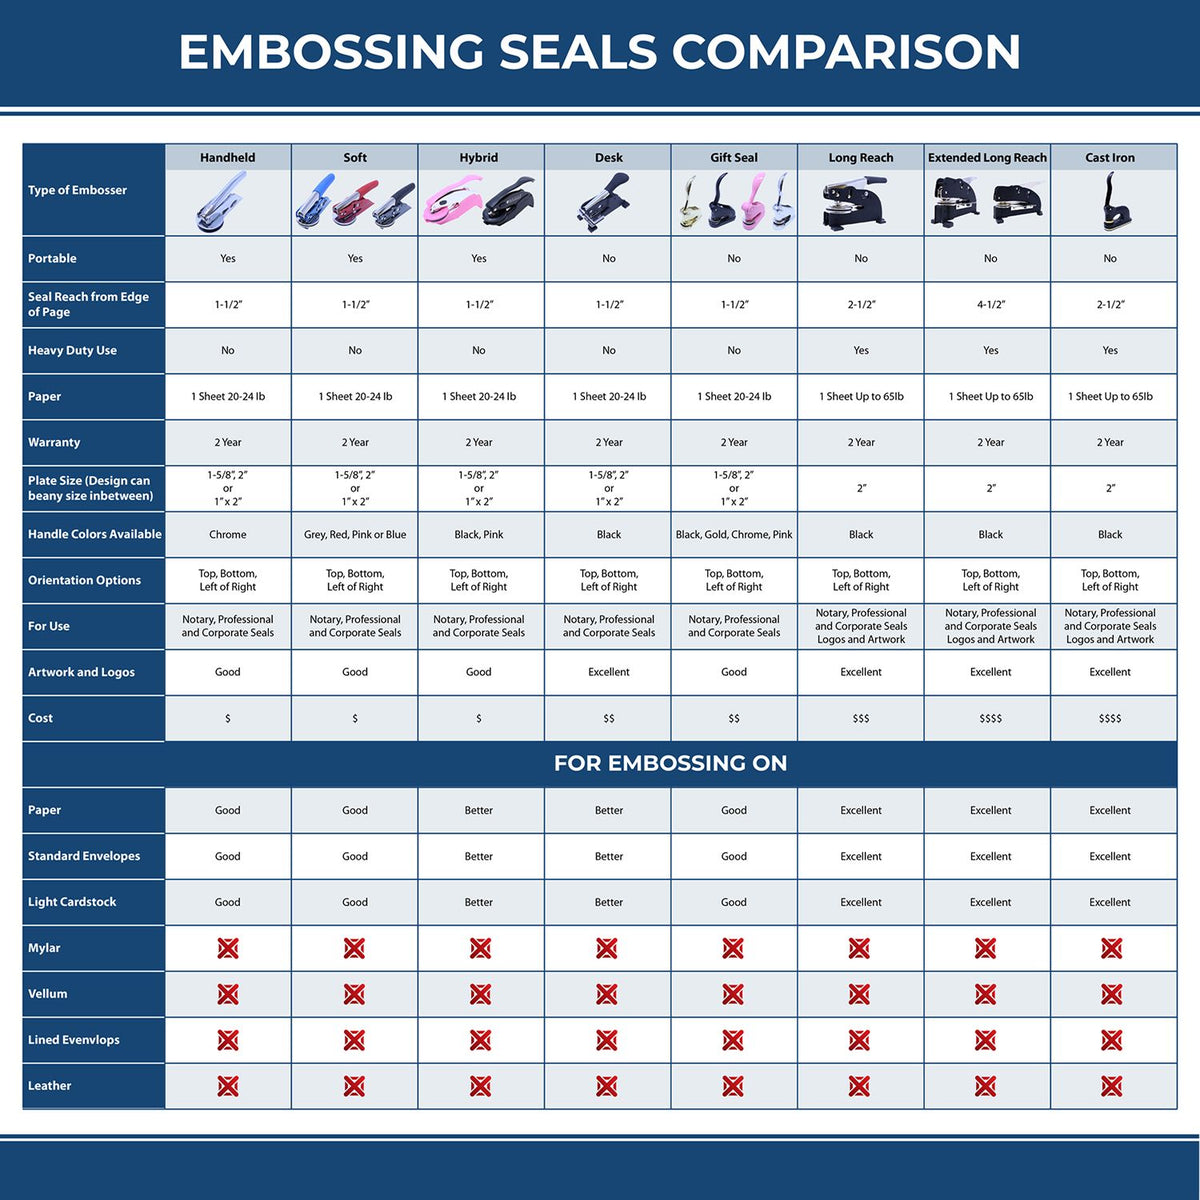 A comparison chart for the different types of mount models available for the State of Oklahoma Long Reach Architectural Embossing Seal.